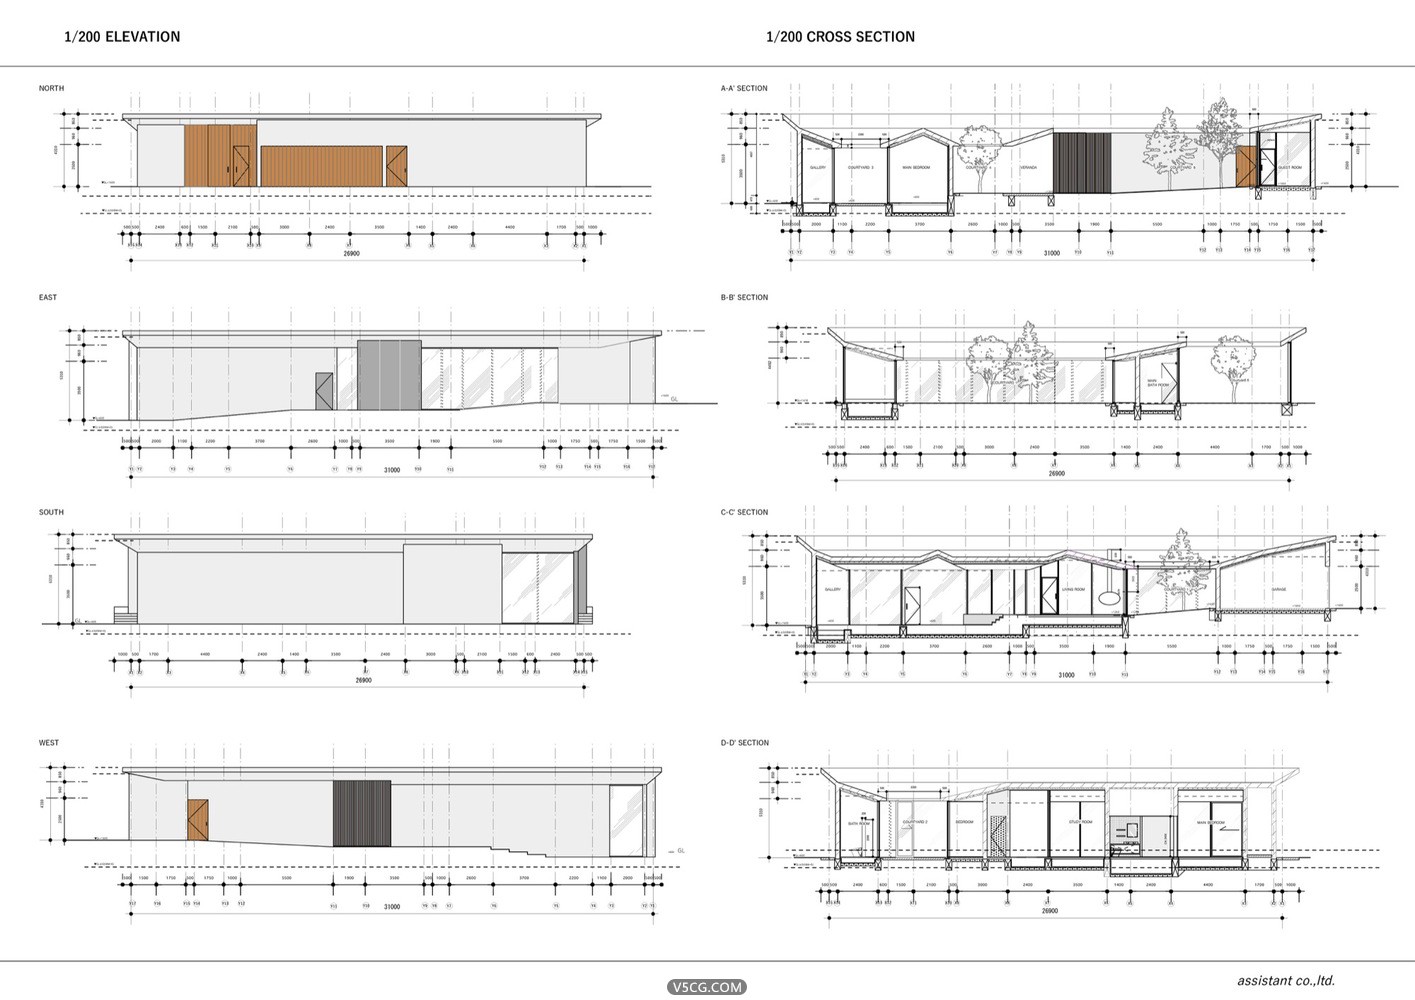 architecturedrawings_elevation_crosssection©Assistant.jpg